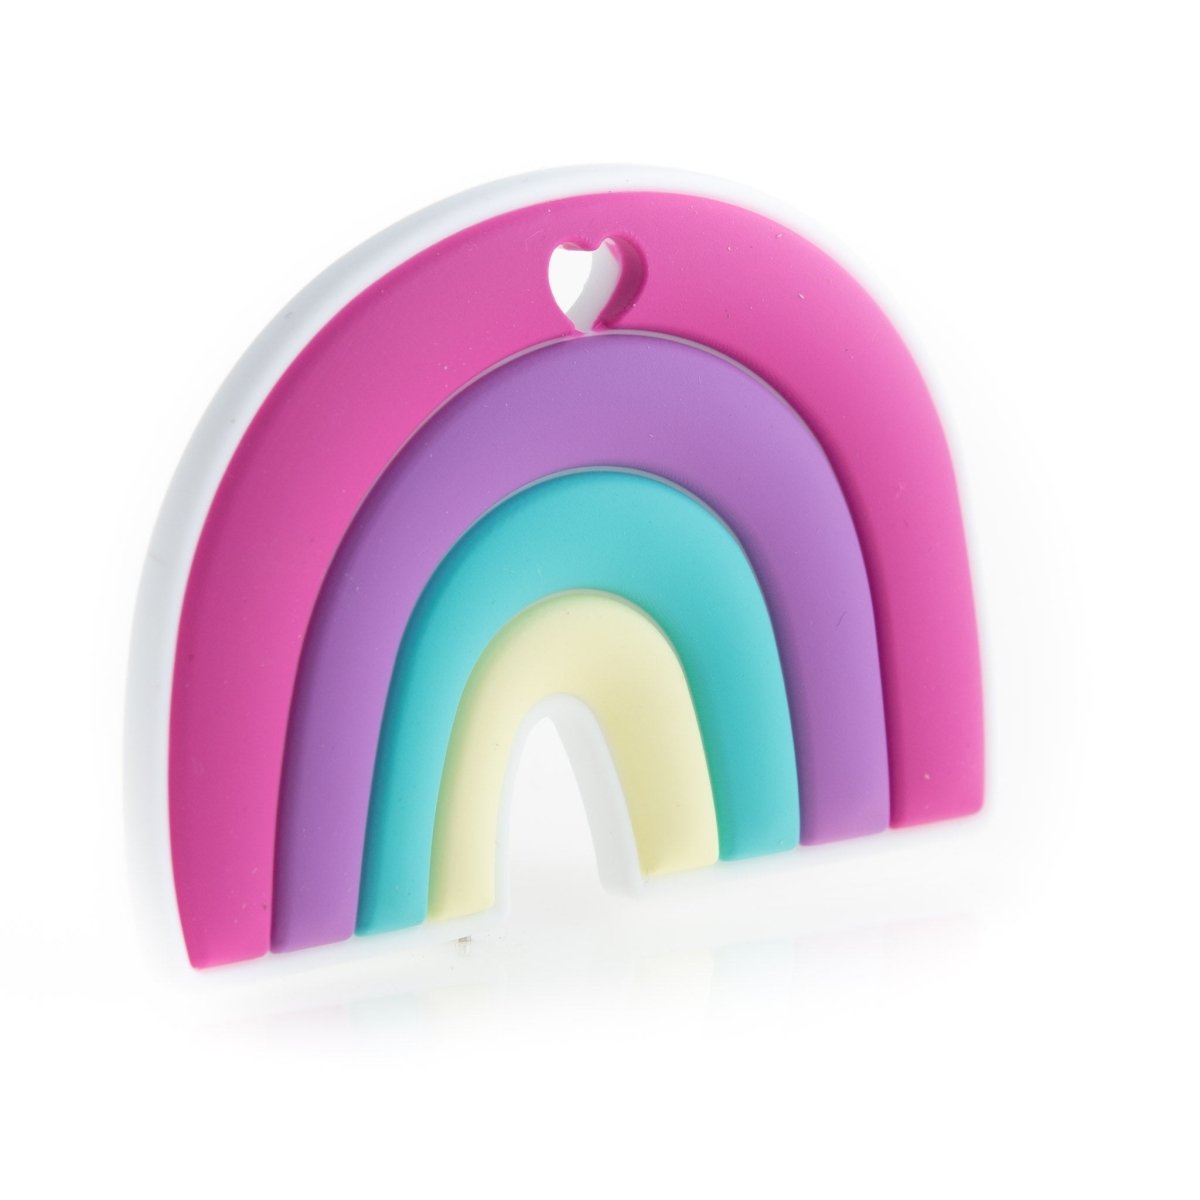 Silicone Teethers and Pendants Colorful Rainbows Day Break from Cara & Co Craft Supply